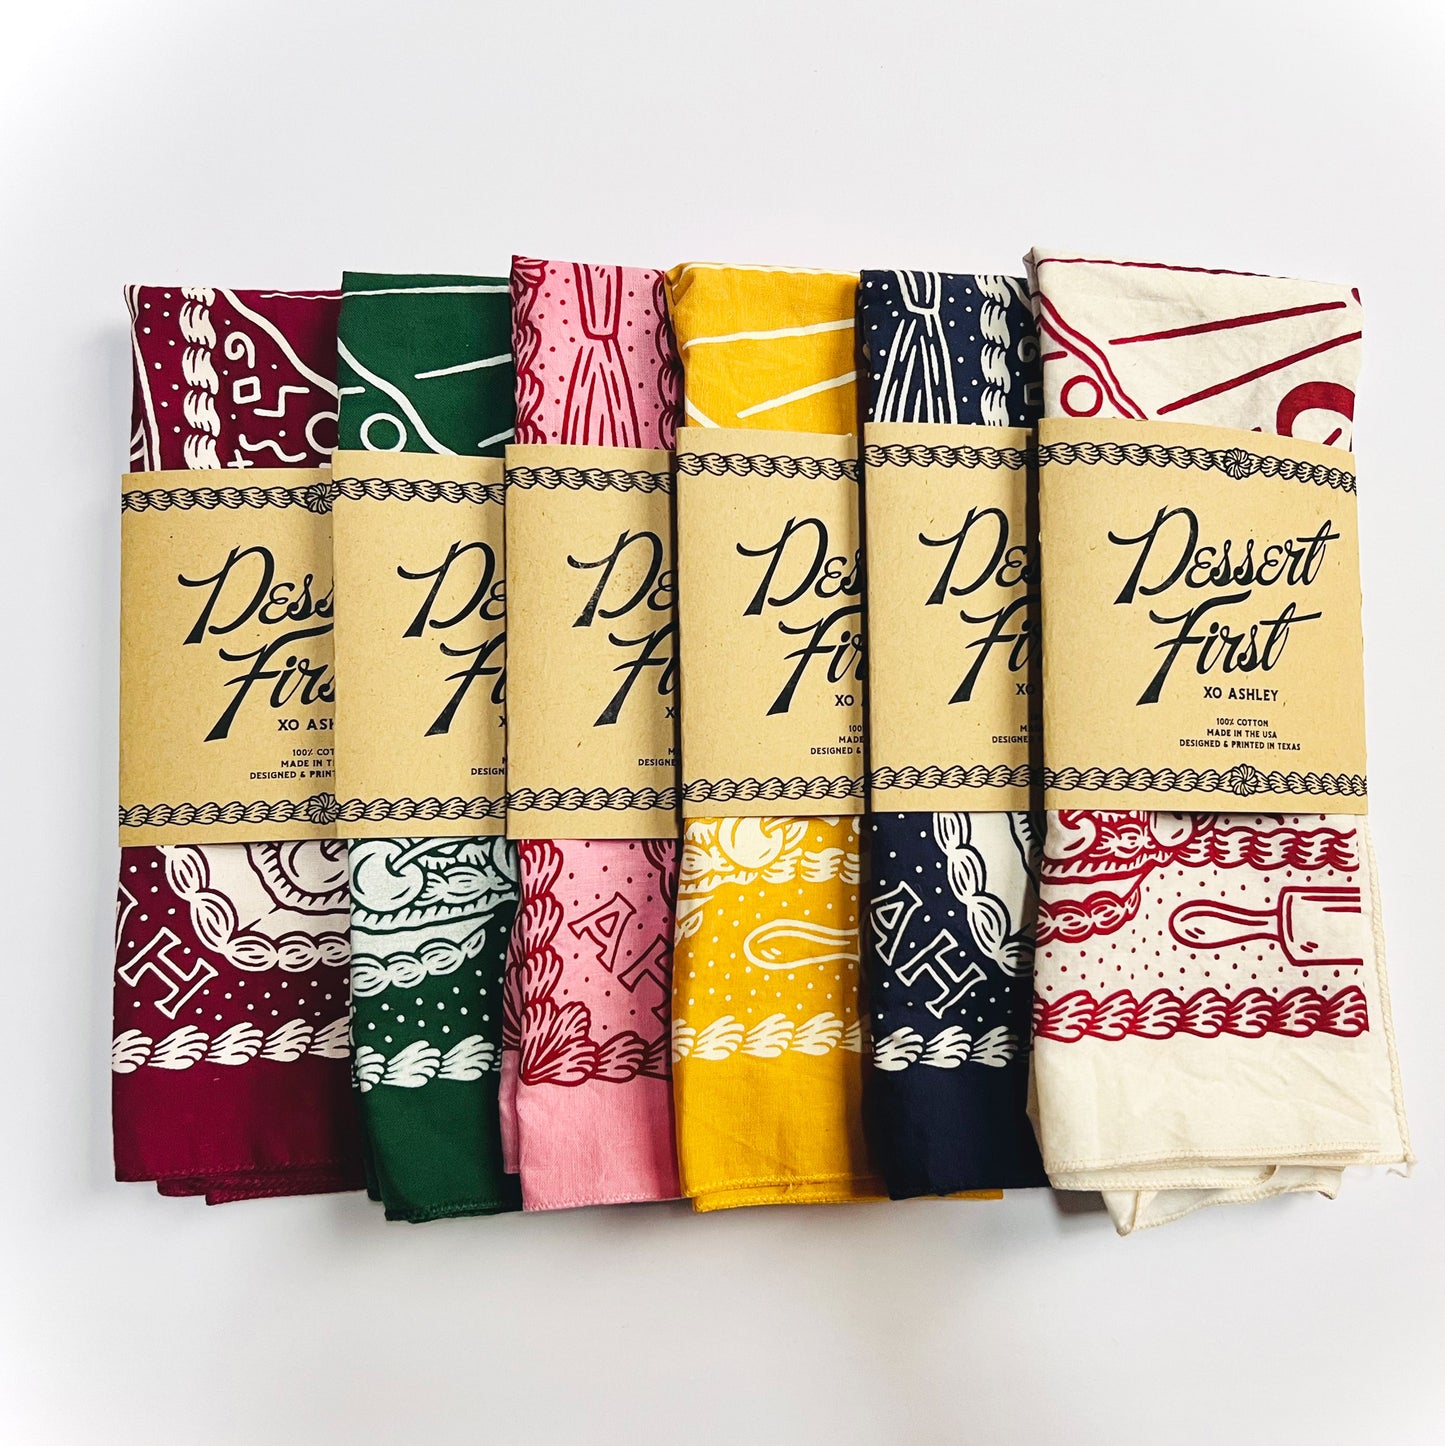 collection of Dessert First bandanas - wine, hunter green, pink, gold, navy and natural